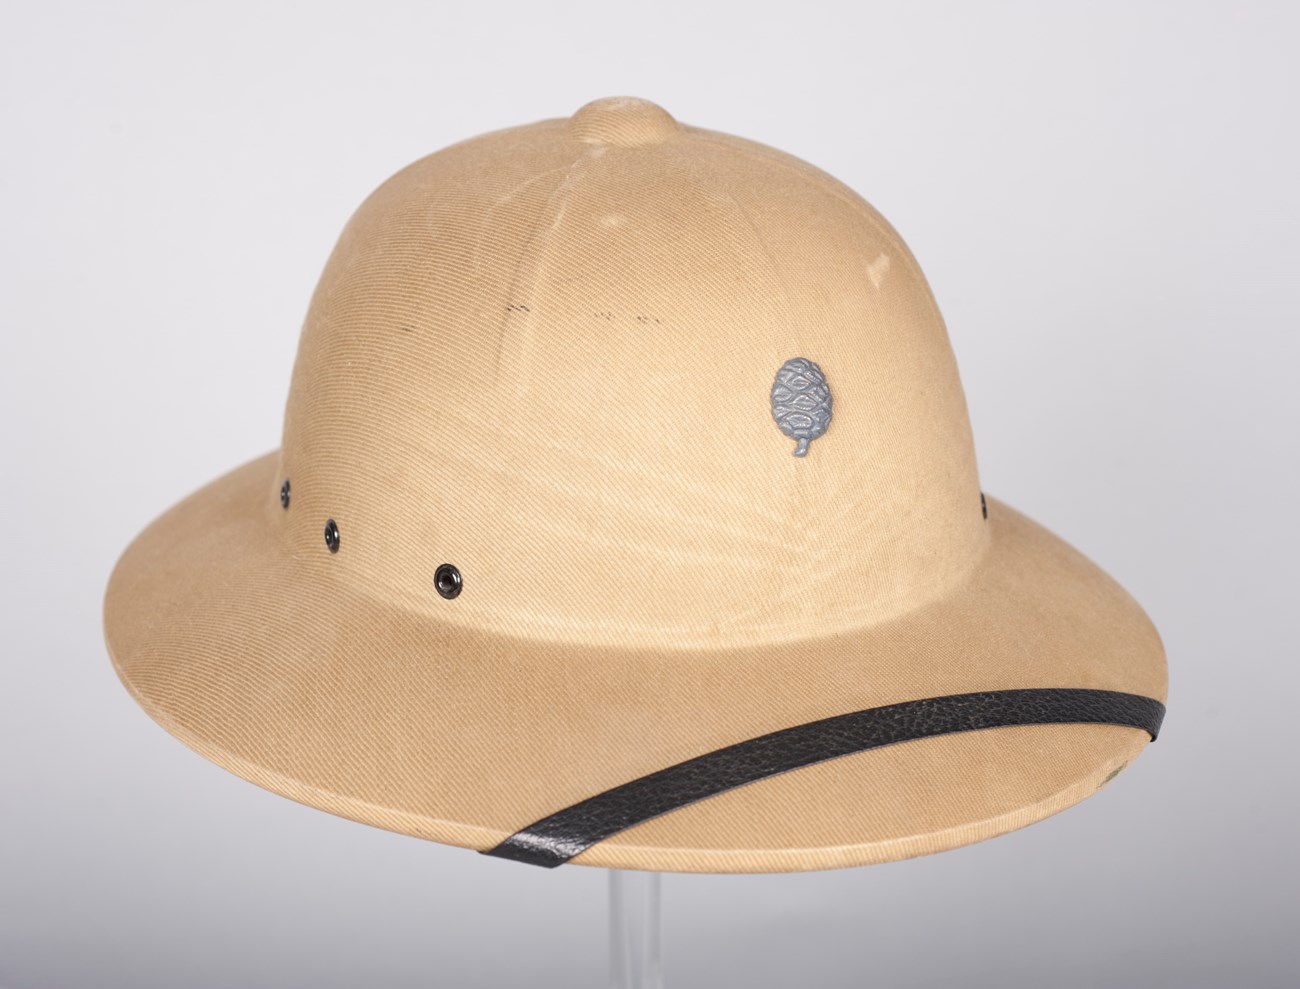 Tan pith helmet with a silver Sequoia cone on the front